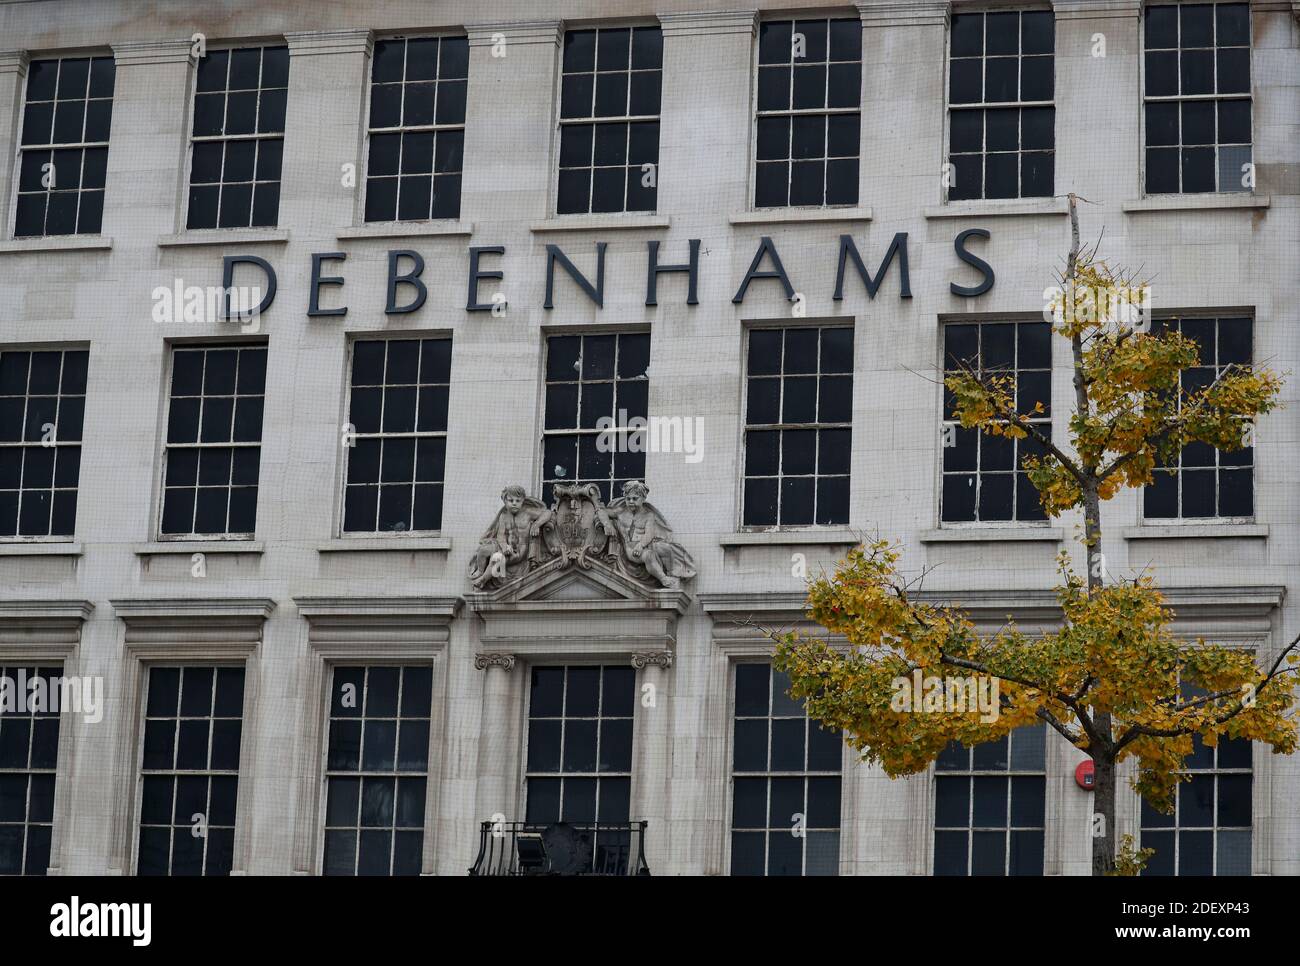 Nottingham, Nottinghamshire, UK. 2nd December 2020. Frontage of a Debenhams after the department store chain collapsed but opened its stores for a stock clearance sale. Credit Darren Staples/Alamy Live News. Stock Photo